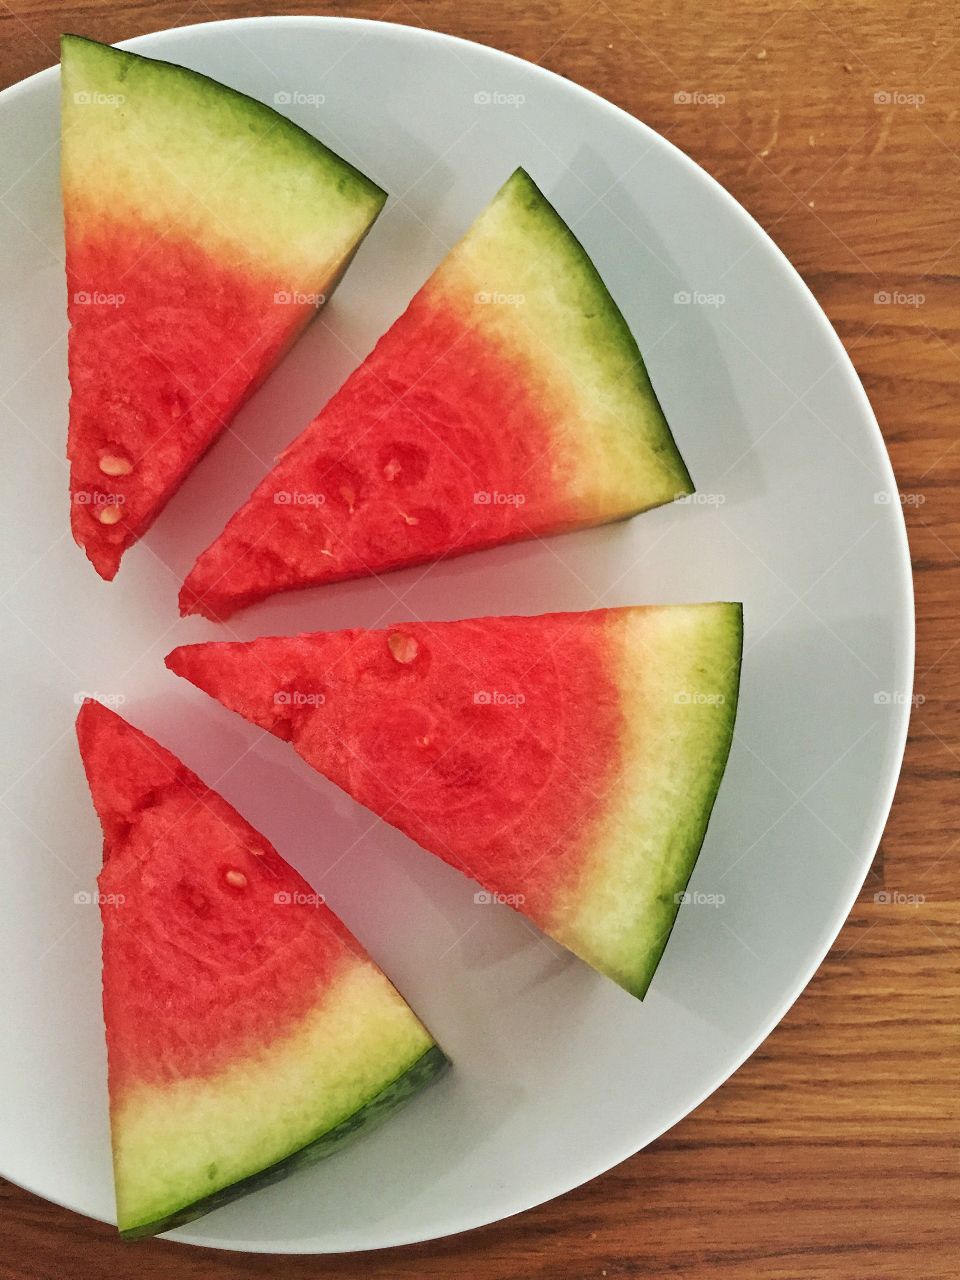 Slices of watermelon on plate